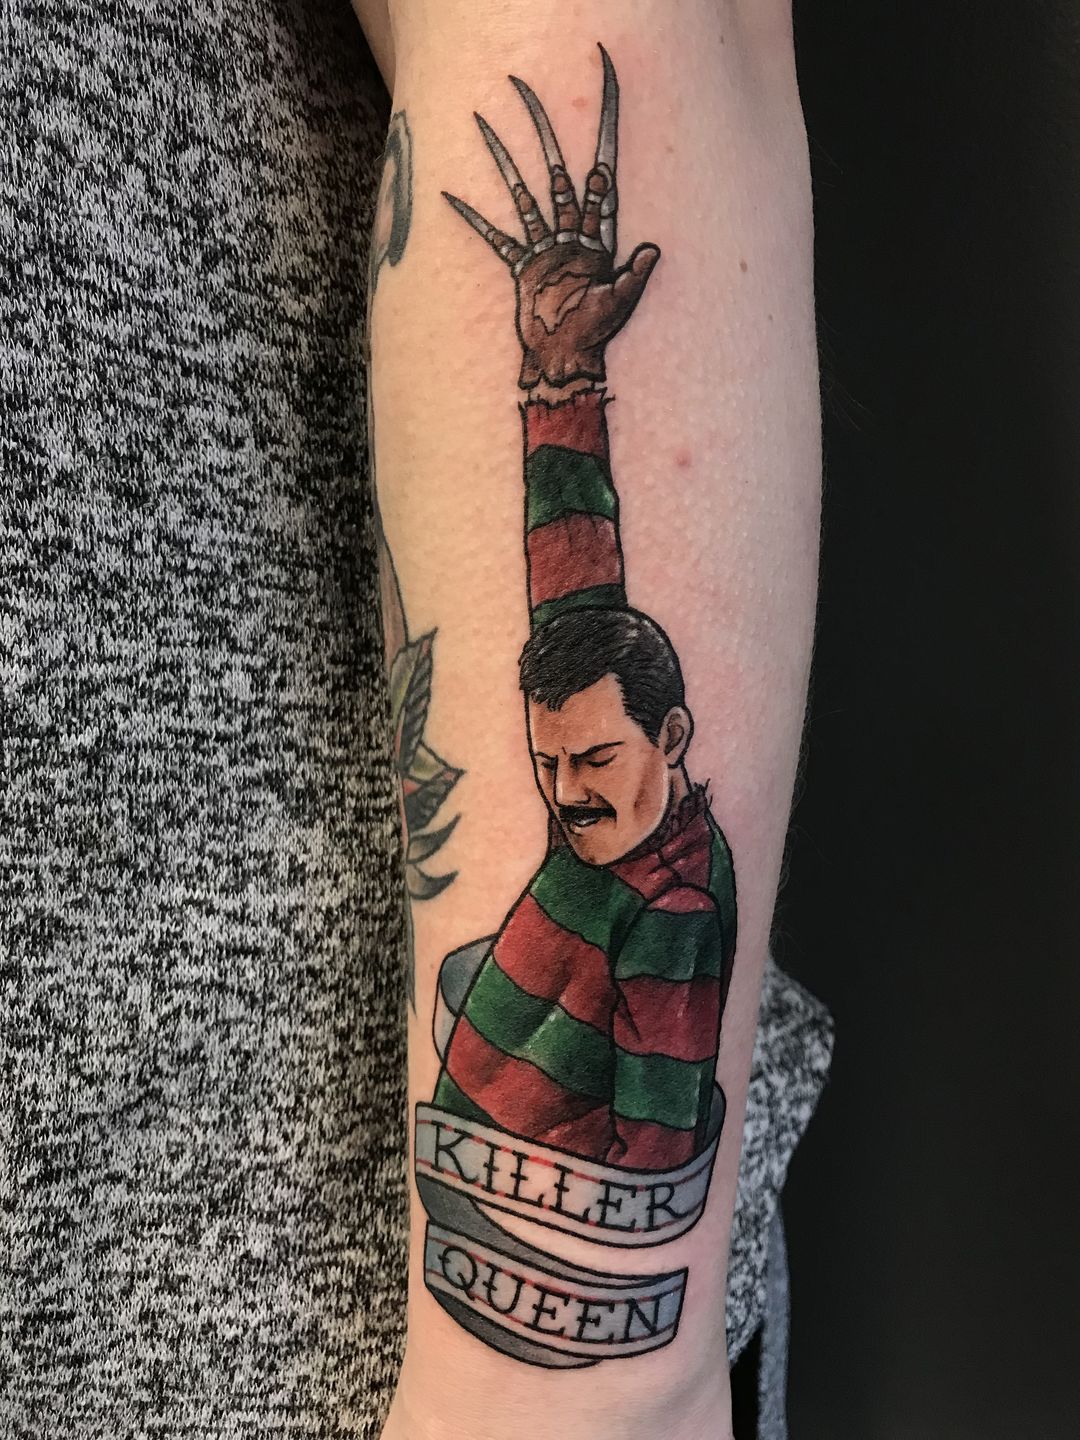 New The 10 Best Tattoo Ideas Today with Pictures  In memory of Freddie  Mercury officialqueenmusic brianmayforreal B  Tatuaje universo  Tatuajes Dibujos